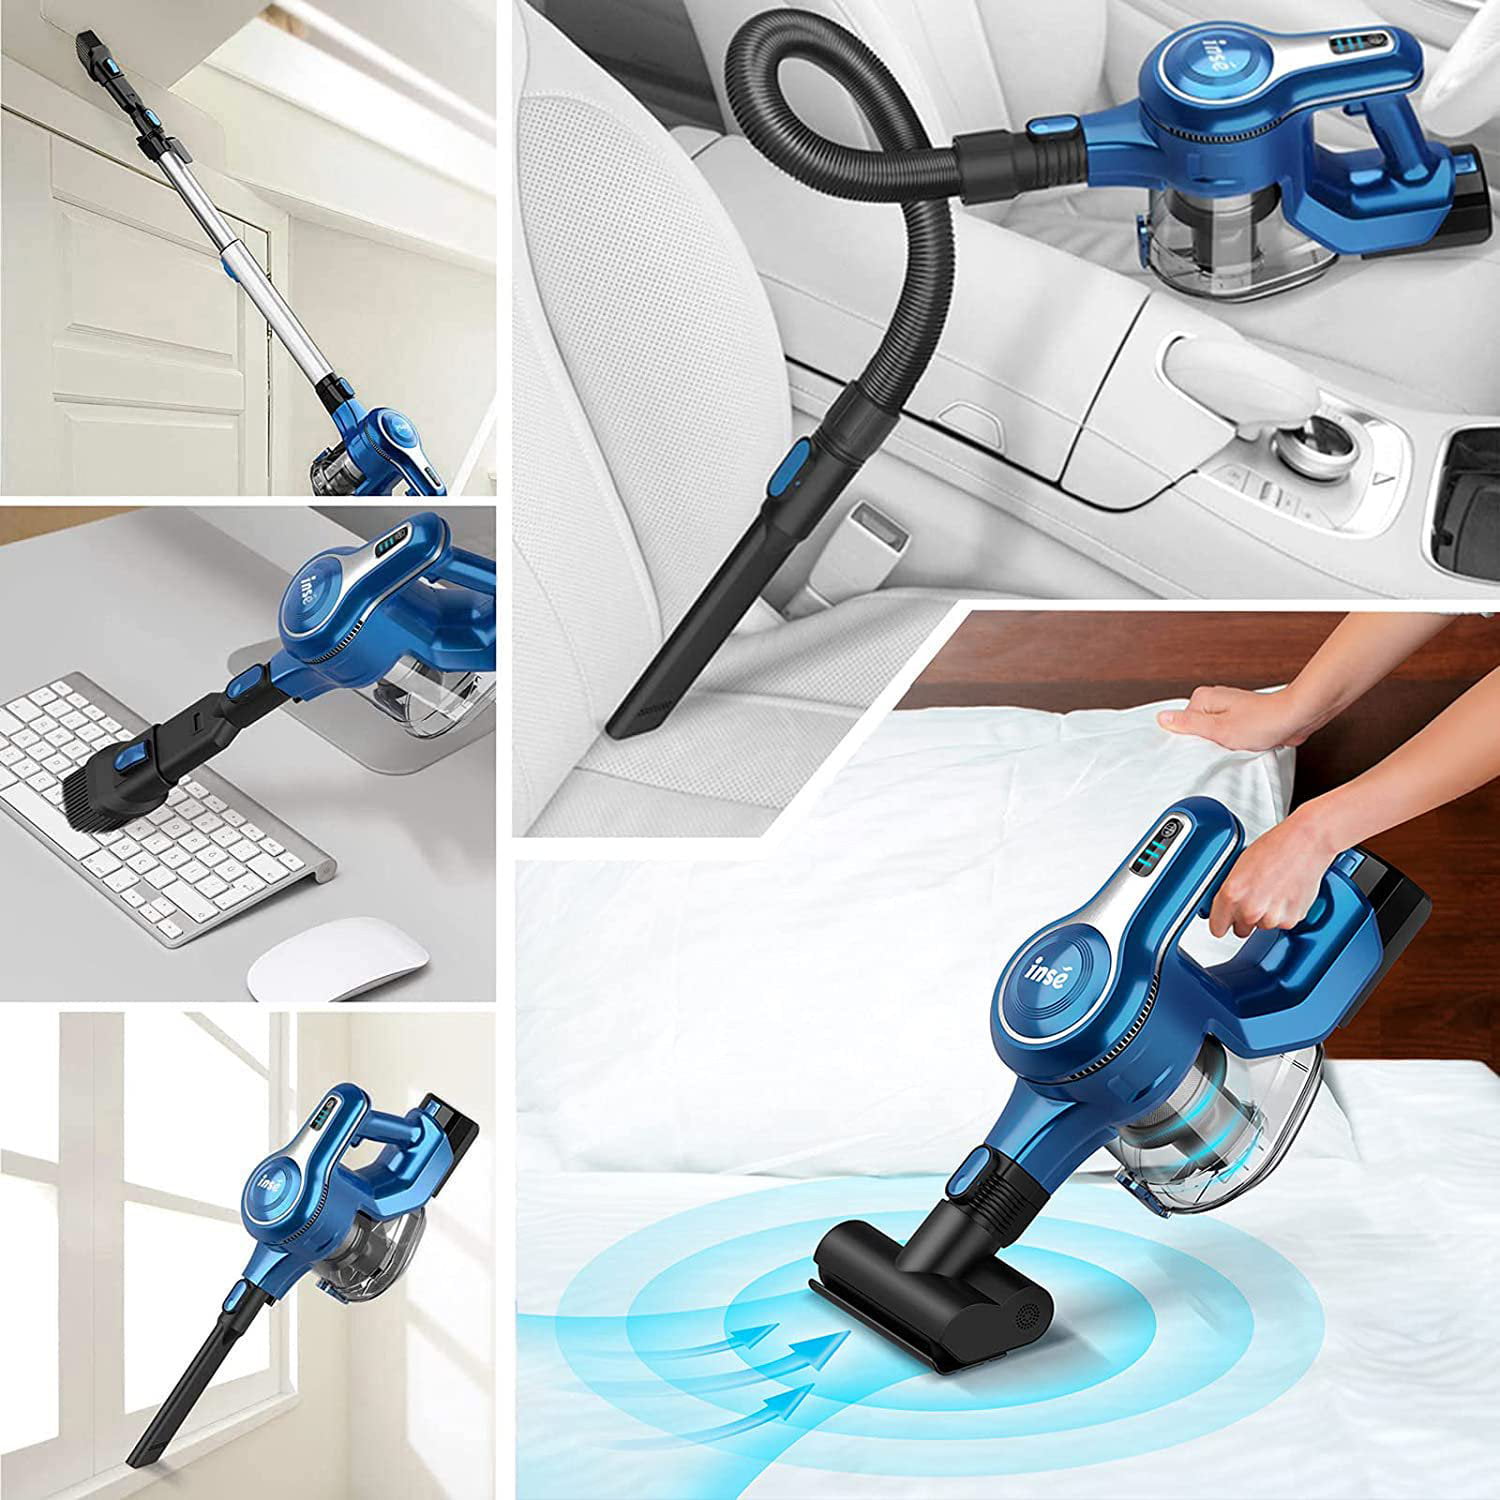 INSE Cordless Vacuum Cleaner, 23Kpa 250W Brushless Motor Stick Vacuum, 10-in-1 Lightweight Handheld for Cleaning - Blue - 2